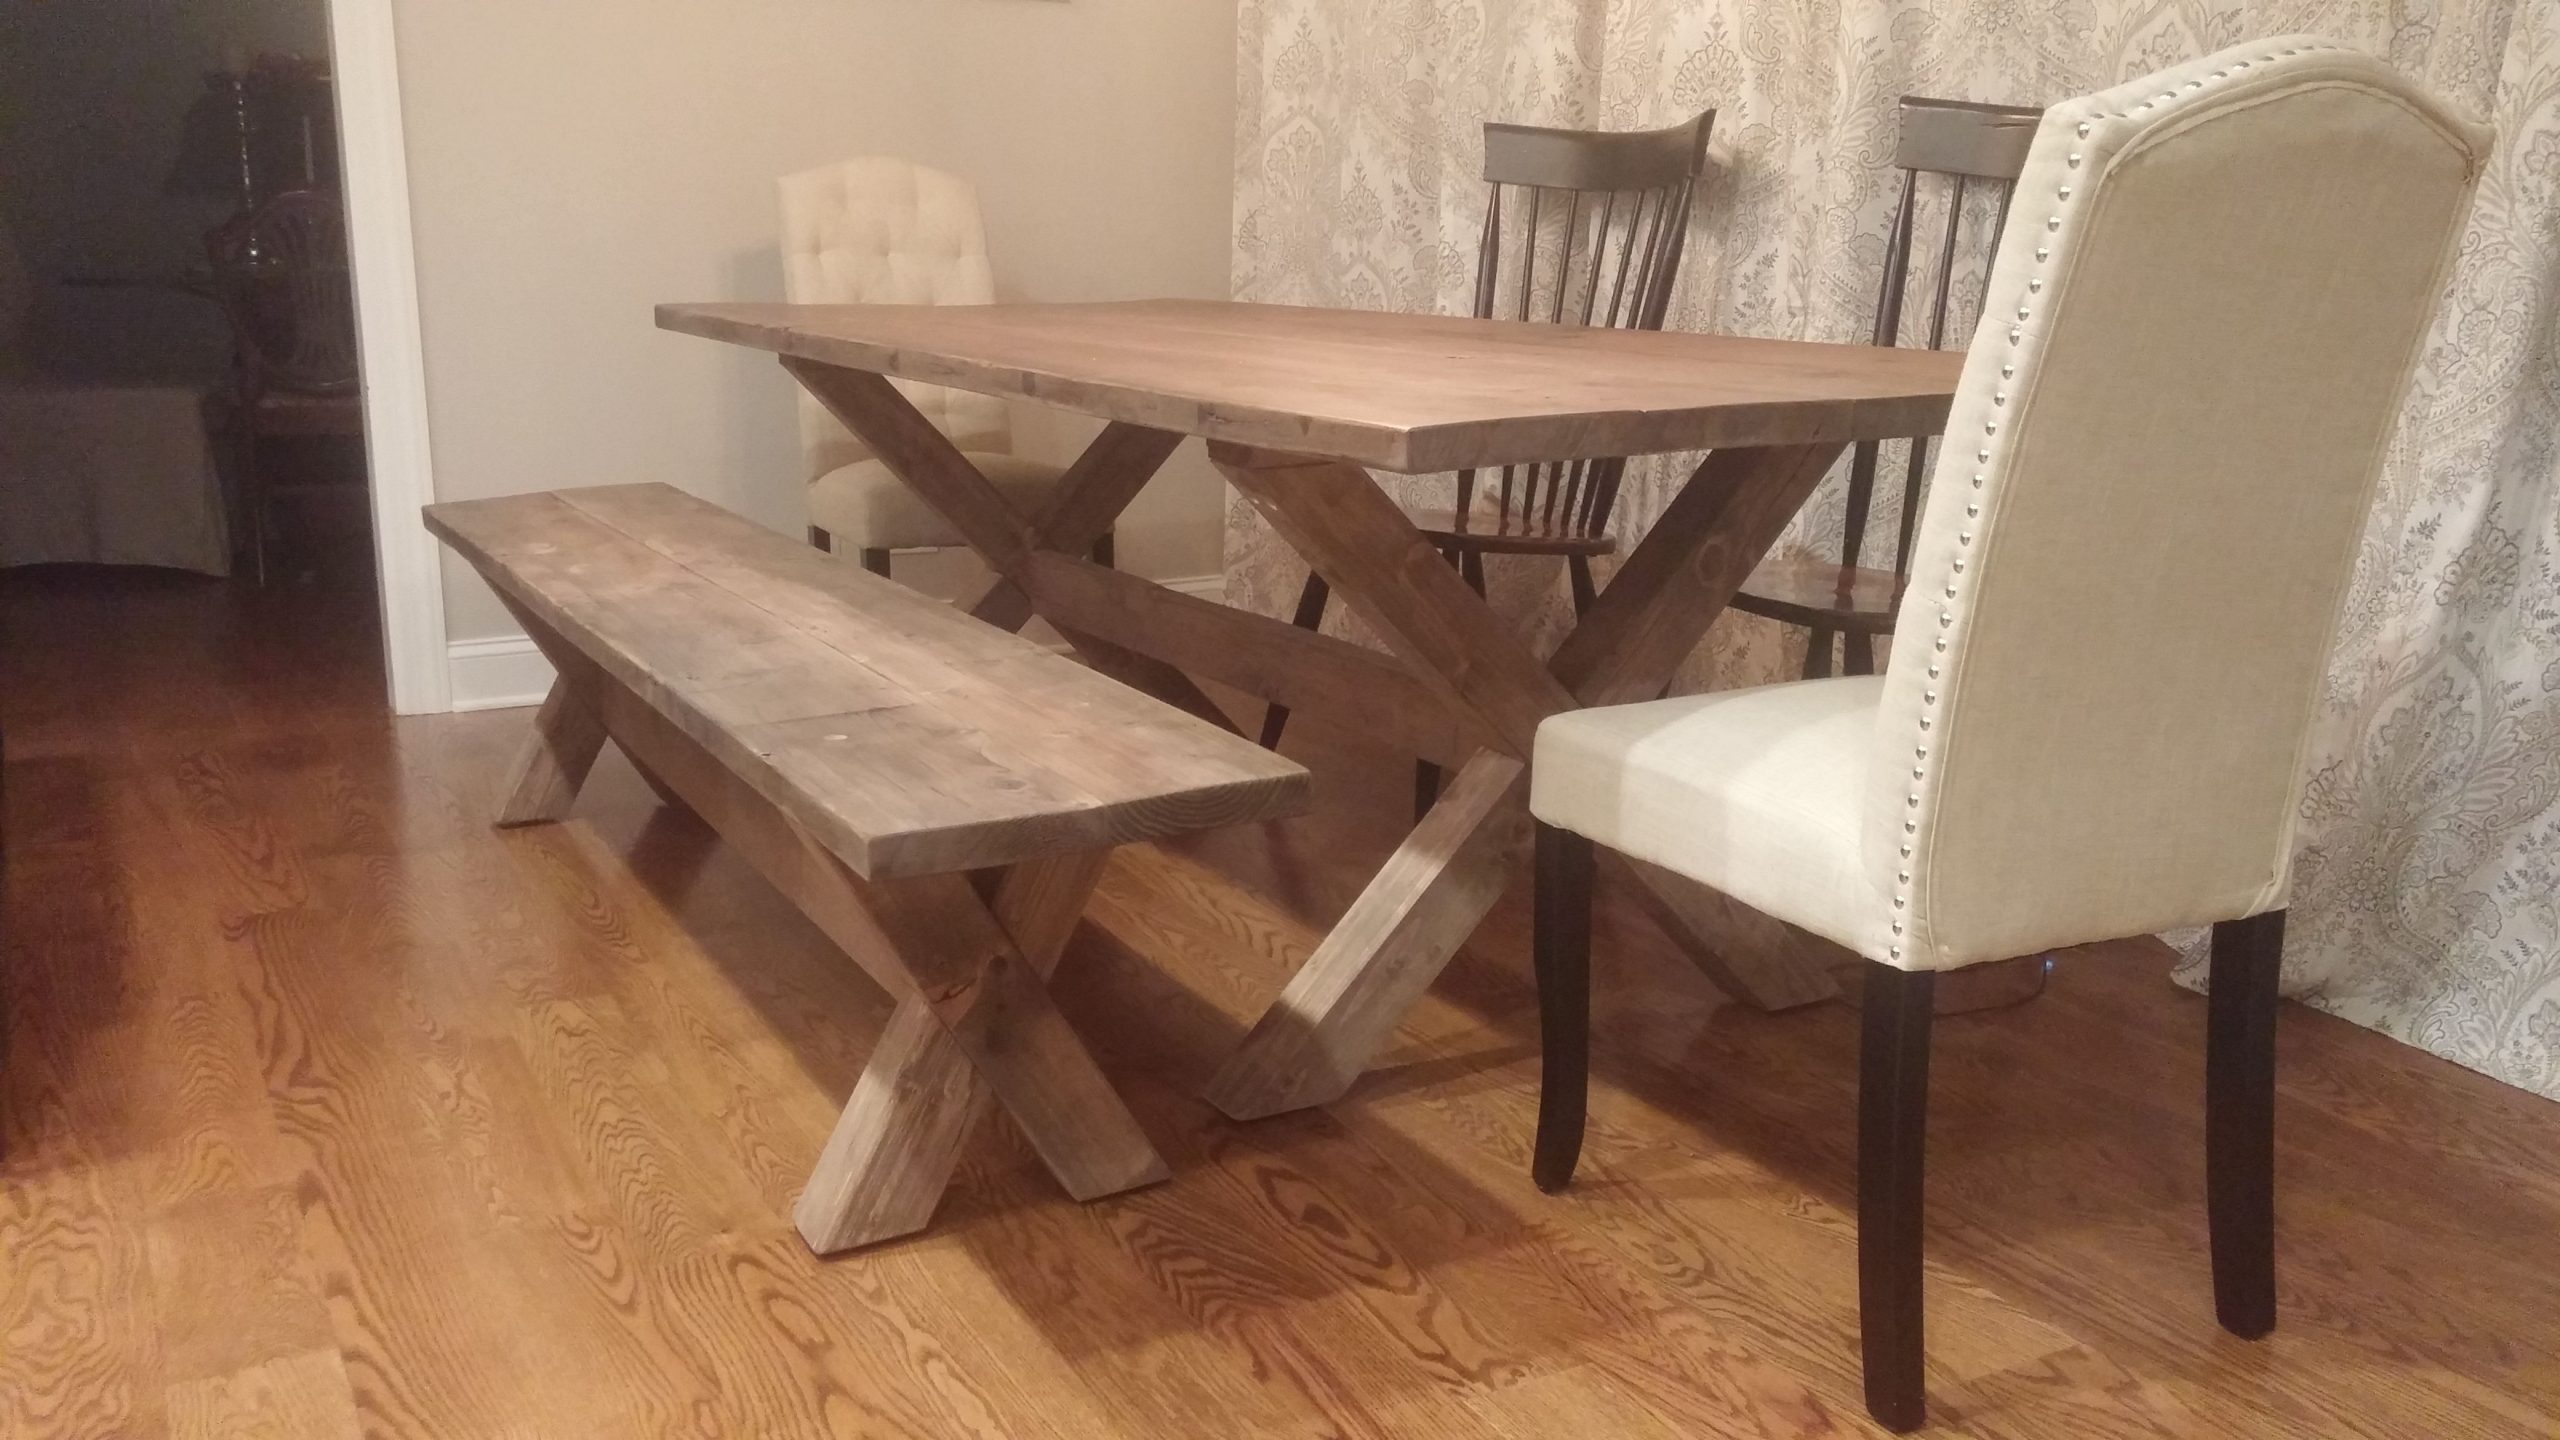 Custom X Base Dining Table Reclaimed Wood Table X Legs within sizing 4160 X 2340